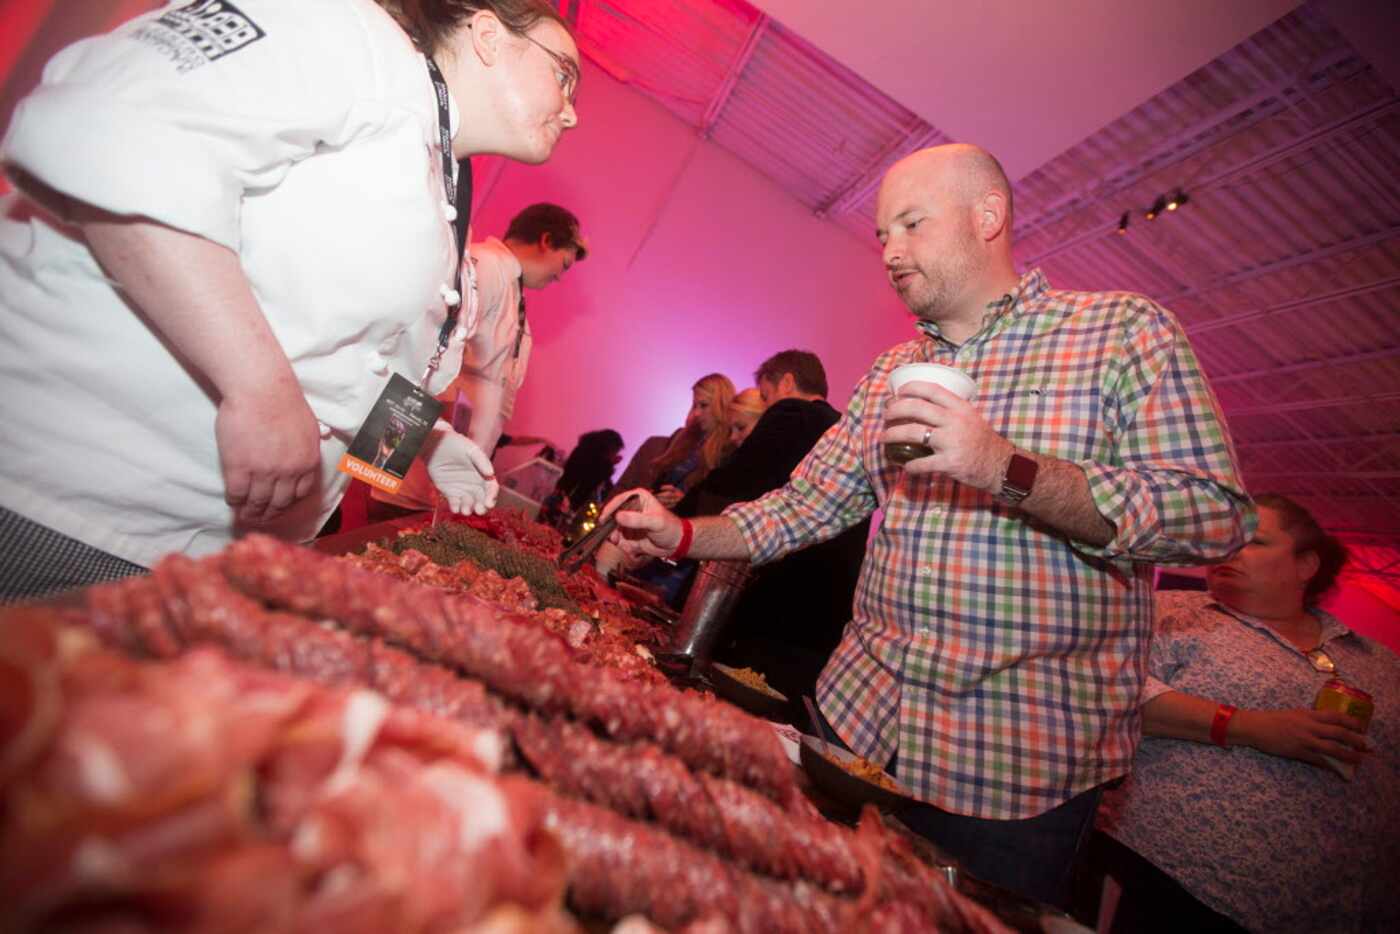 Justin Pate selects samples from a large table of meats during the Chefs for Farmers Butcher...